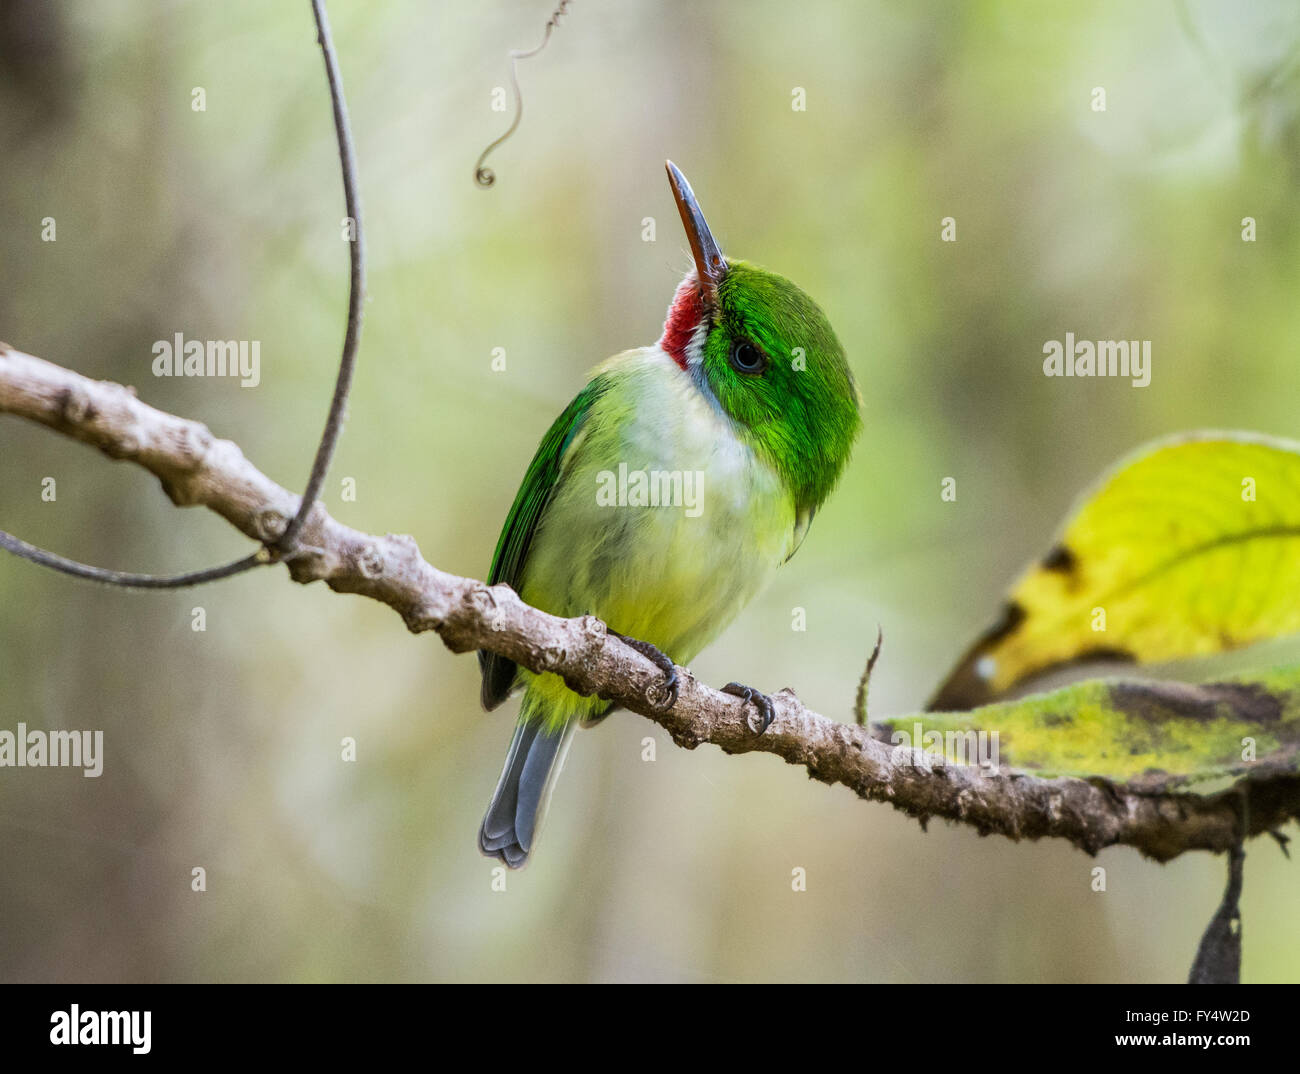 An endemic species Jamaican Tody (Todus todus) perched on a branch. Jamaica, Caribbeans. Stock Photo